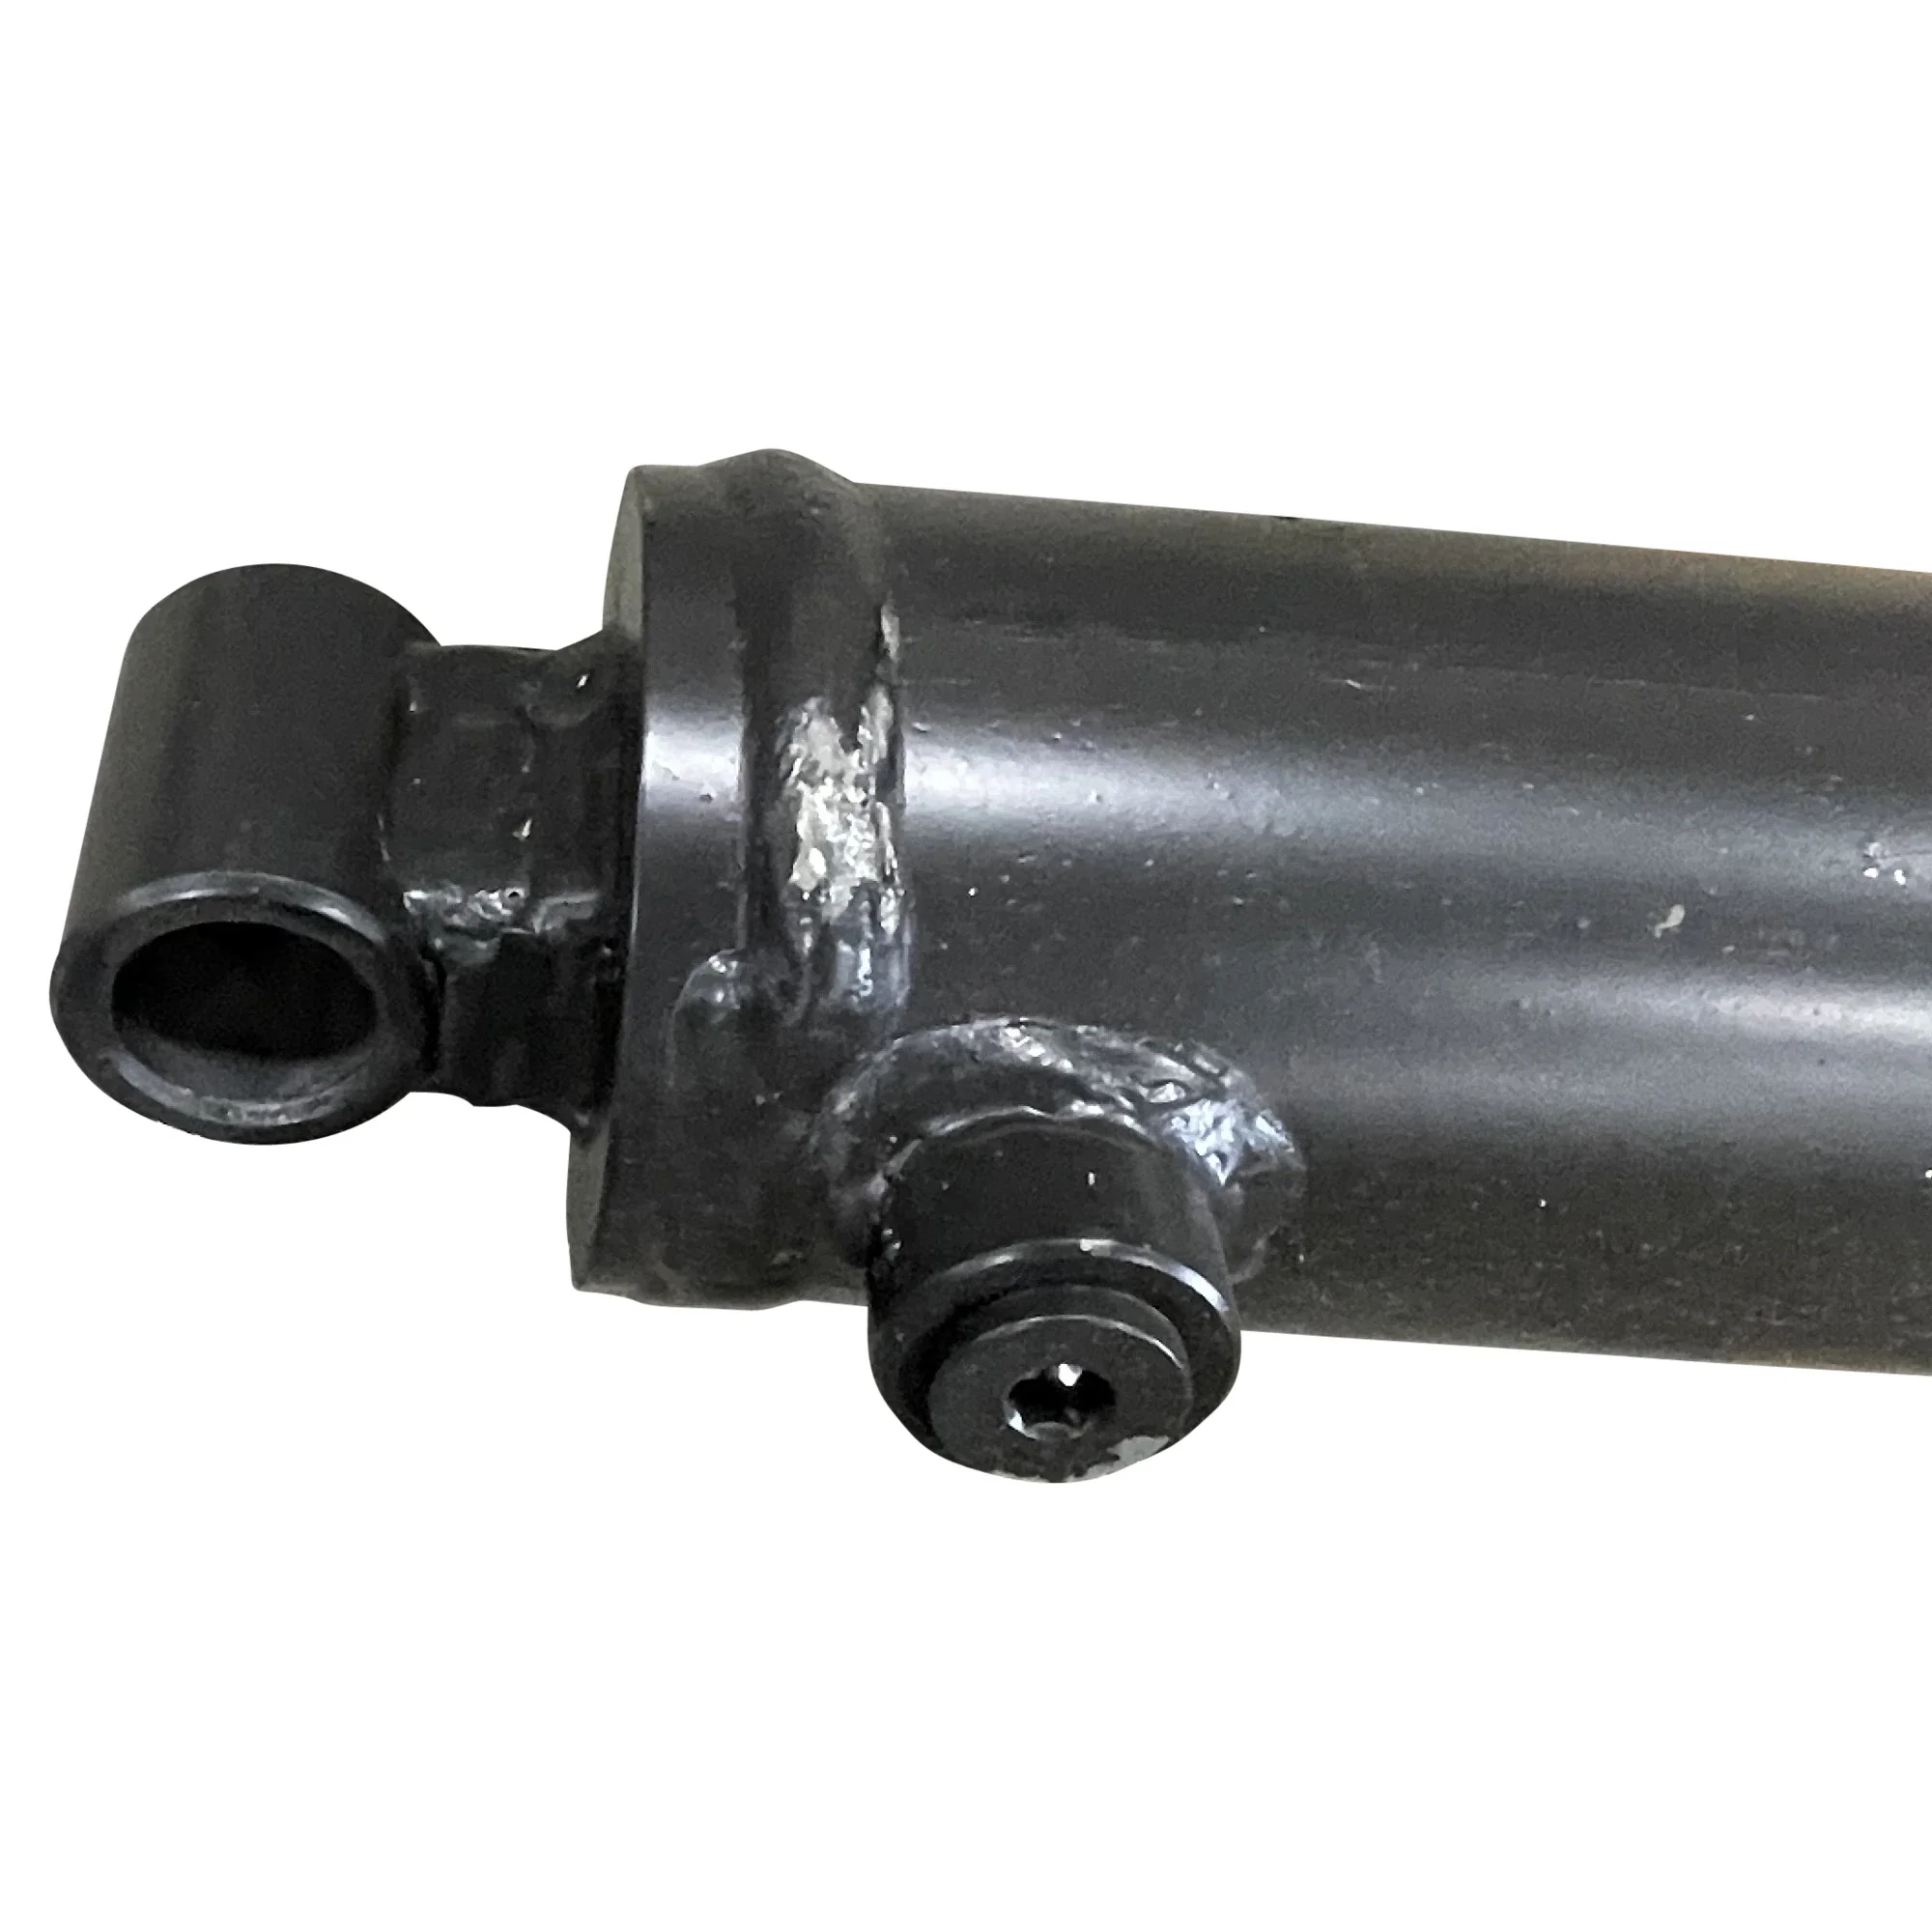 Galbreath™ Double Acting Tail Cylinder (3" X 1.5" X 48")